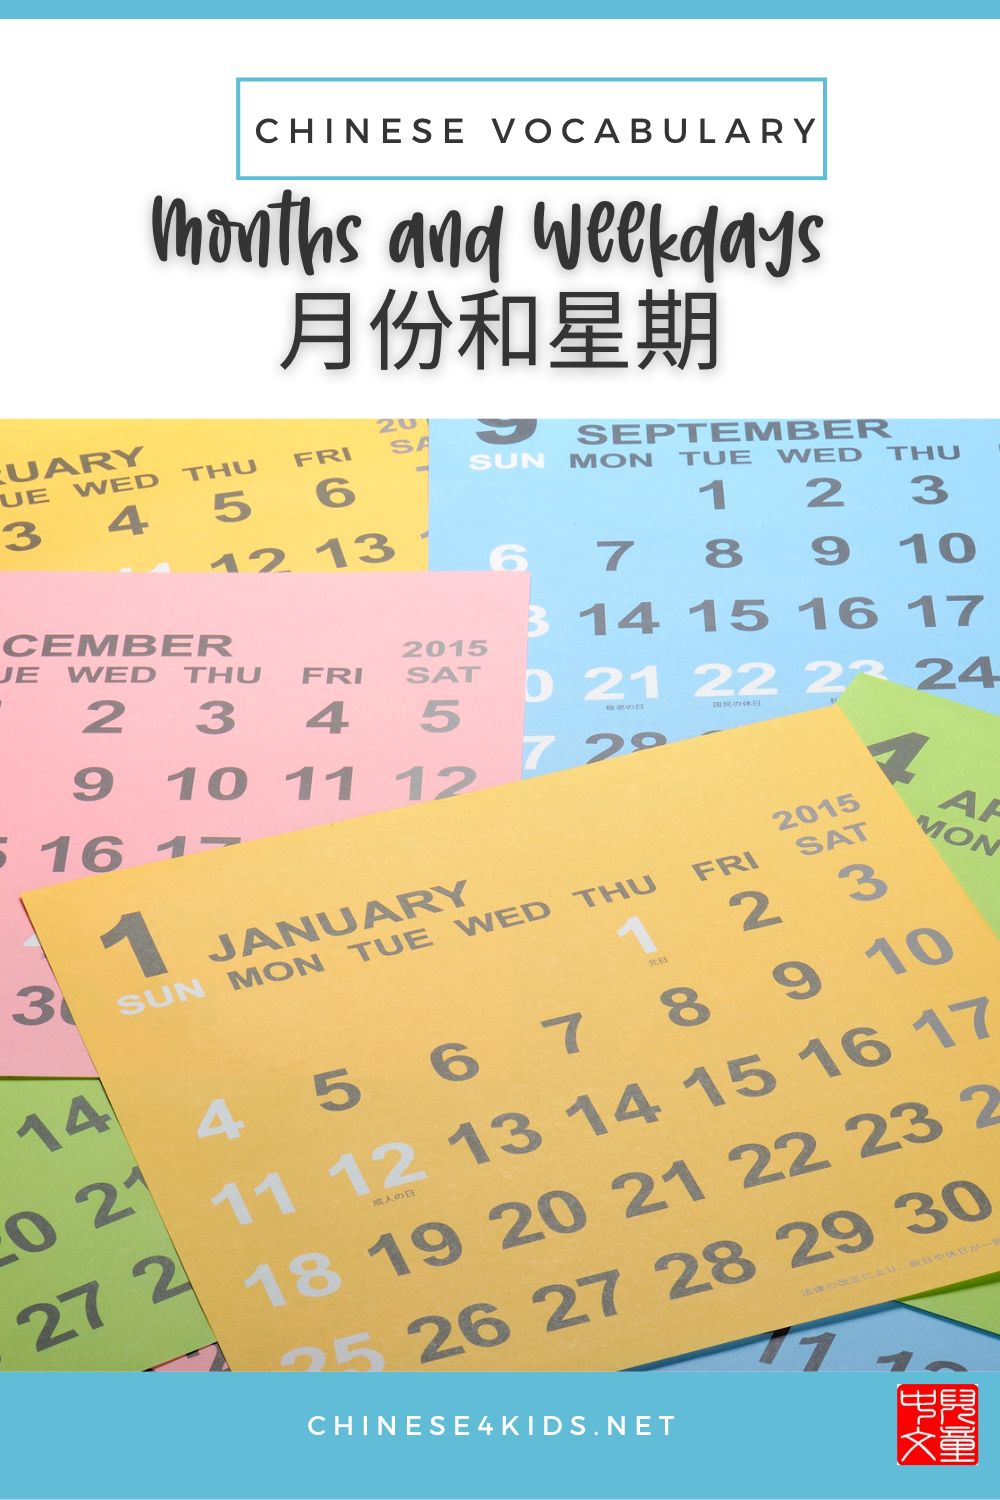 Learn Chinese vocabulary on months and weekdays #Chinese4kids #learnCHinese #Chinesevocabulary